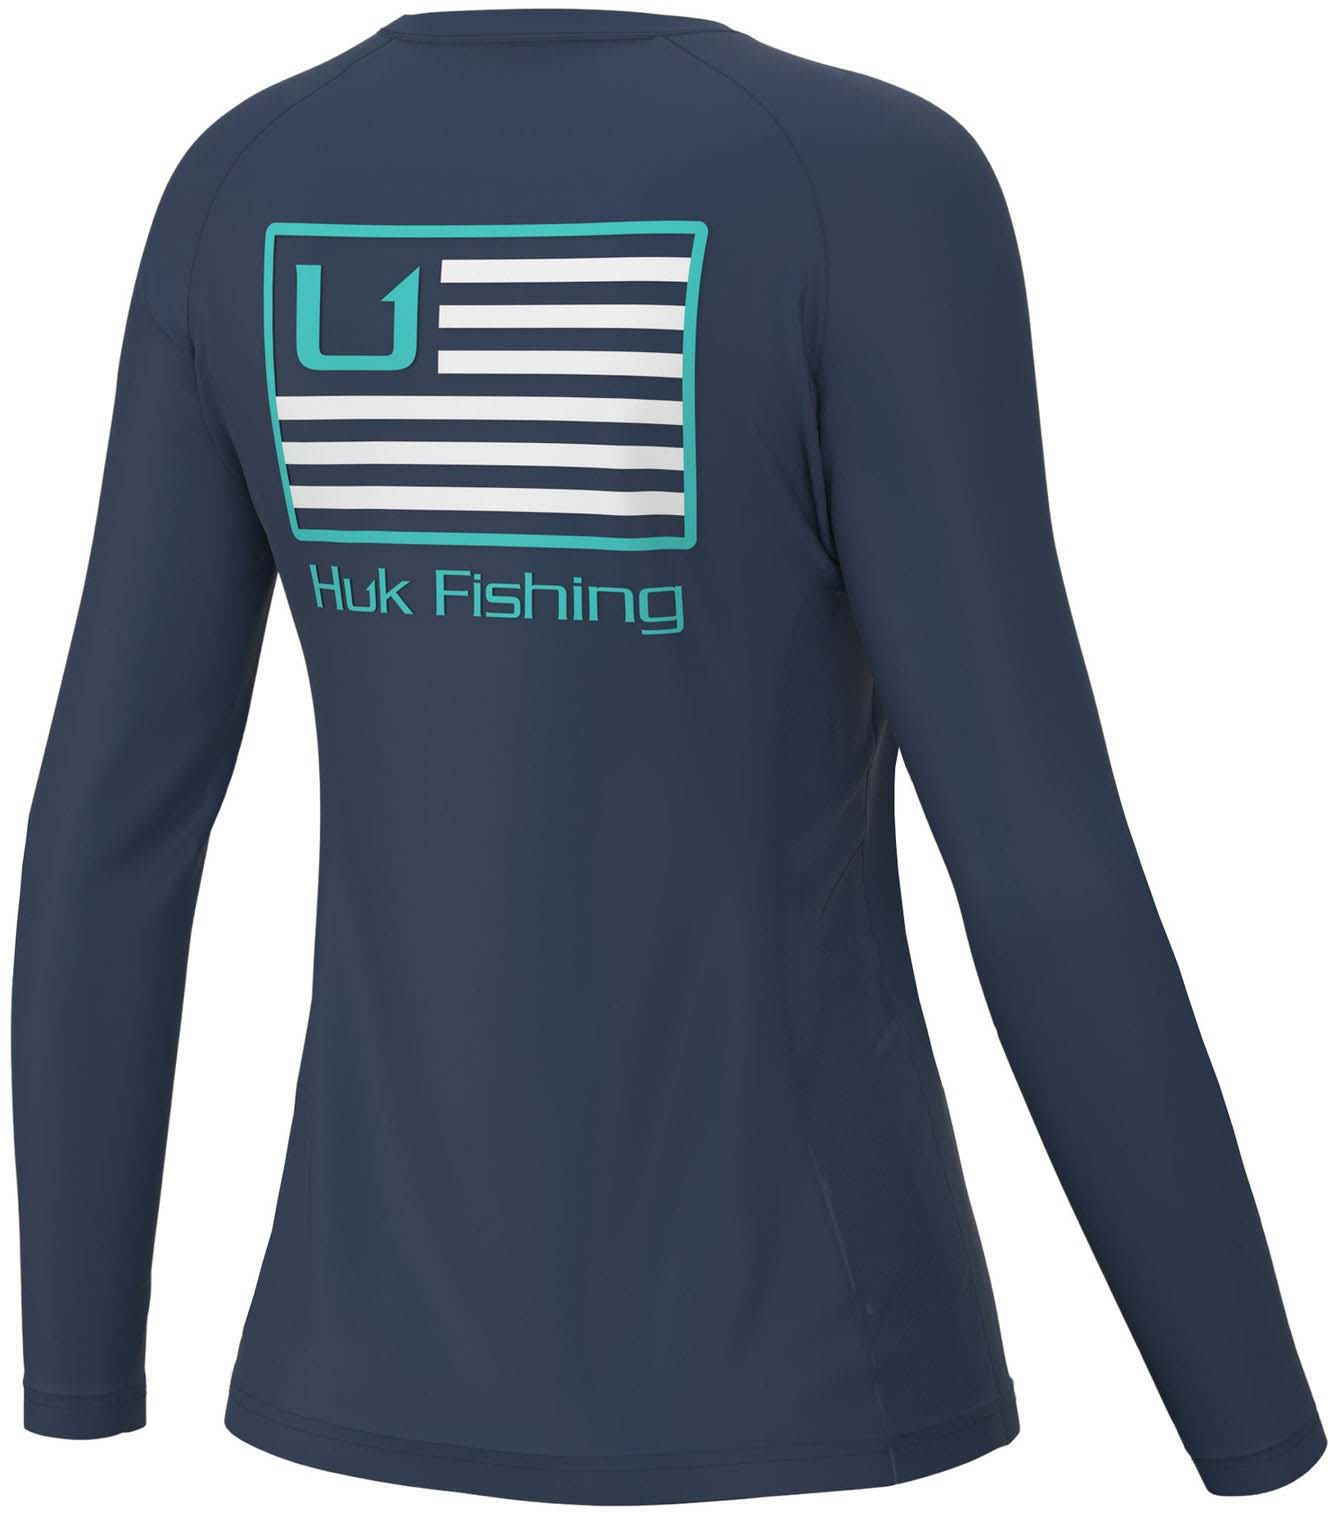 https://op2.0ps.us/original/opplanet-huk-performance-fishing-and-bars-pursuit-long-sleeve-shirt-womens-sargasso-sea-extra-large-h6120100-409-xl-main